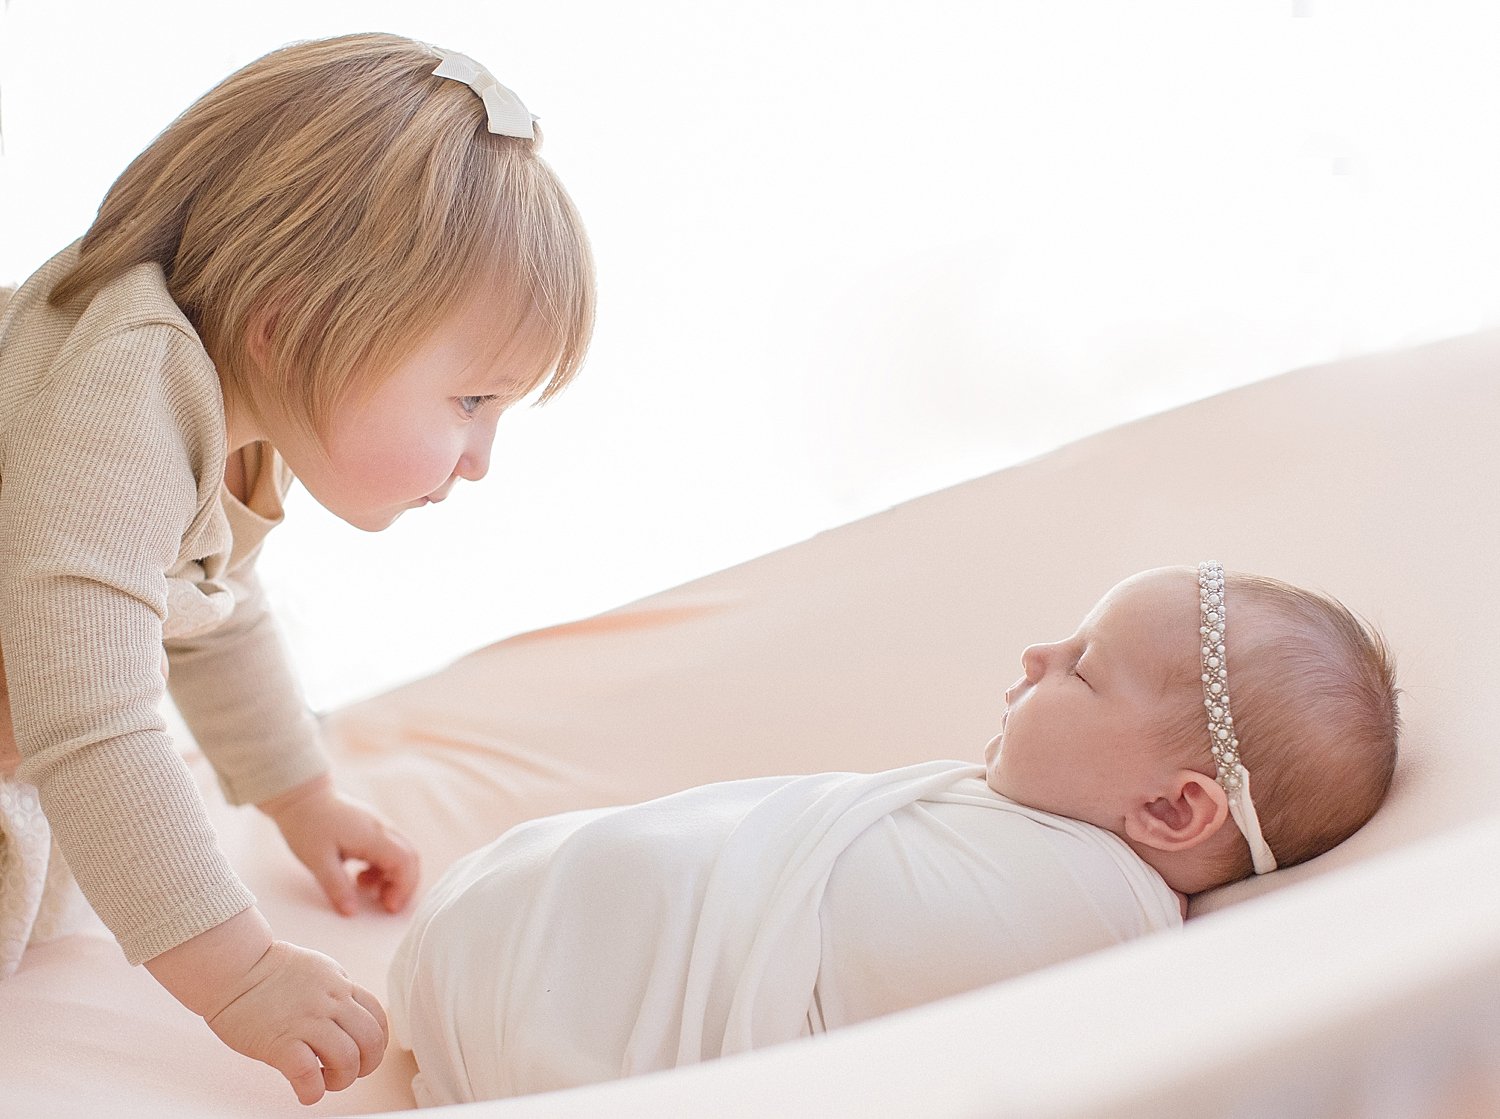 Big sister looking over baby sister | Ambre Williams Photography